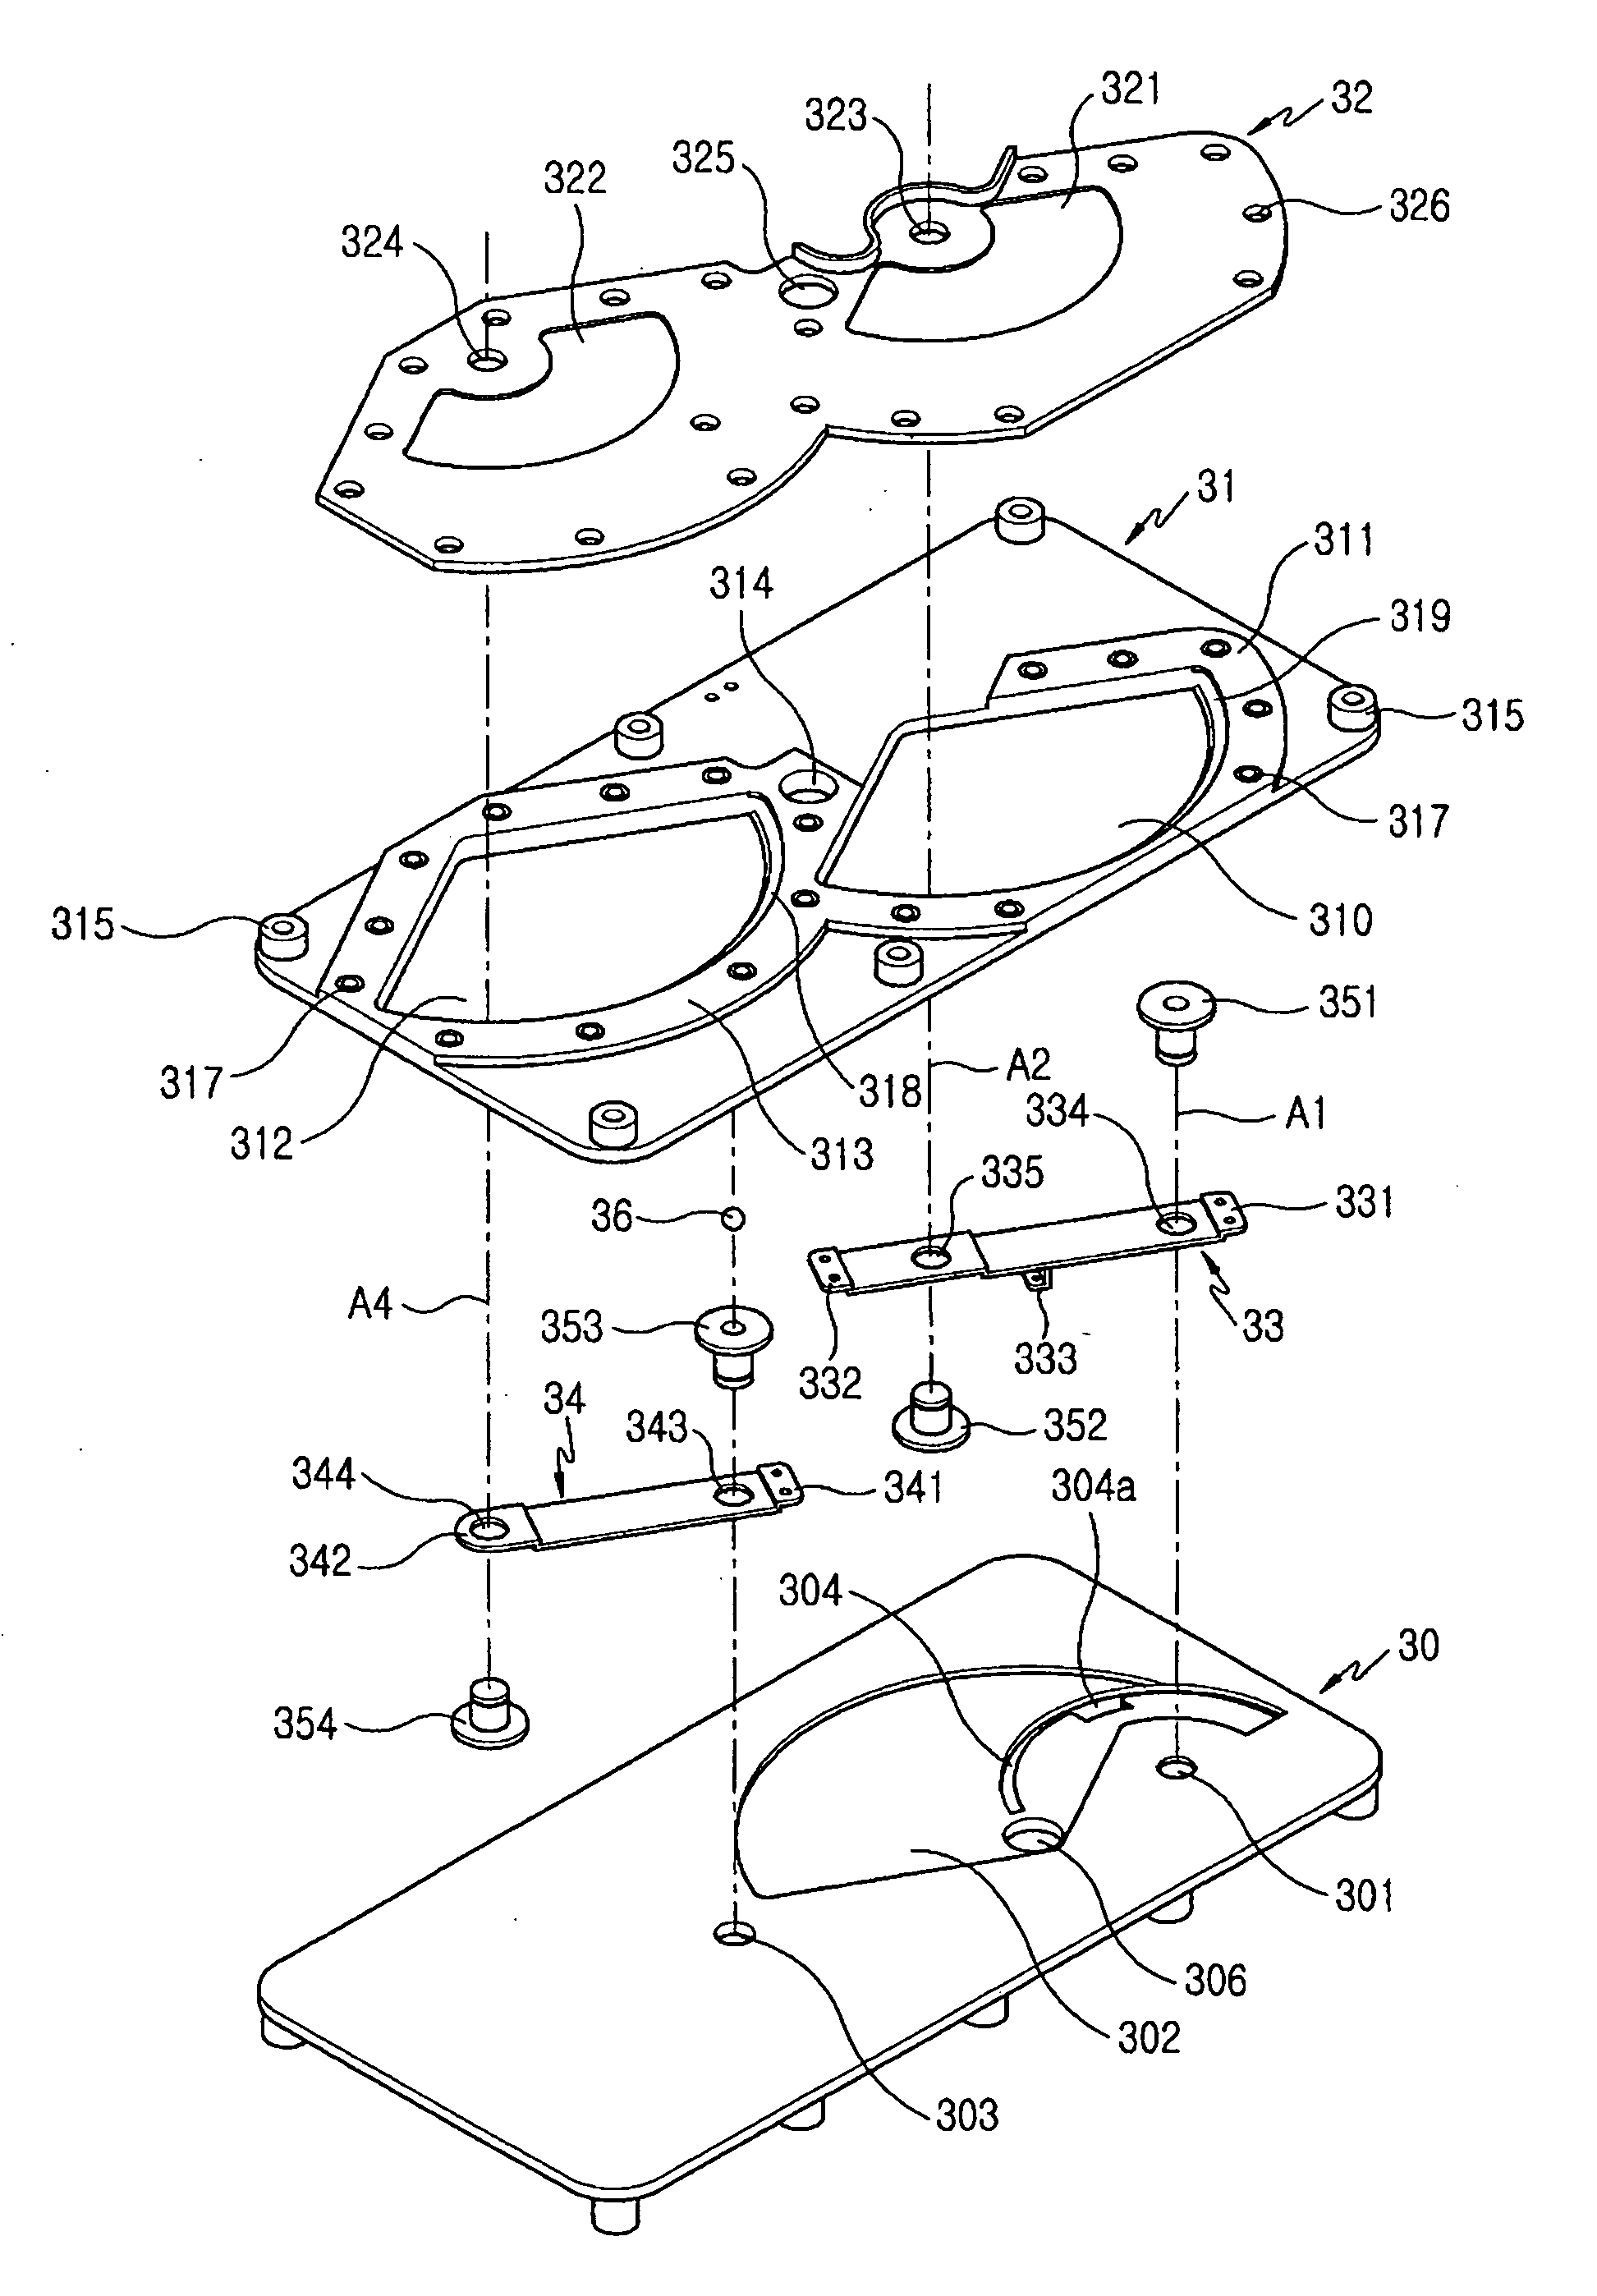 Curved sliding-type portable communication apparatus and sliding device thereof